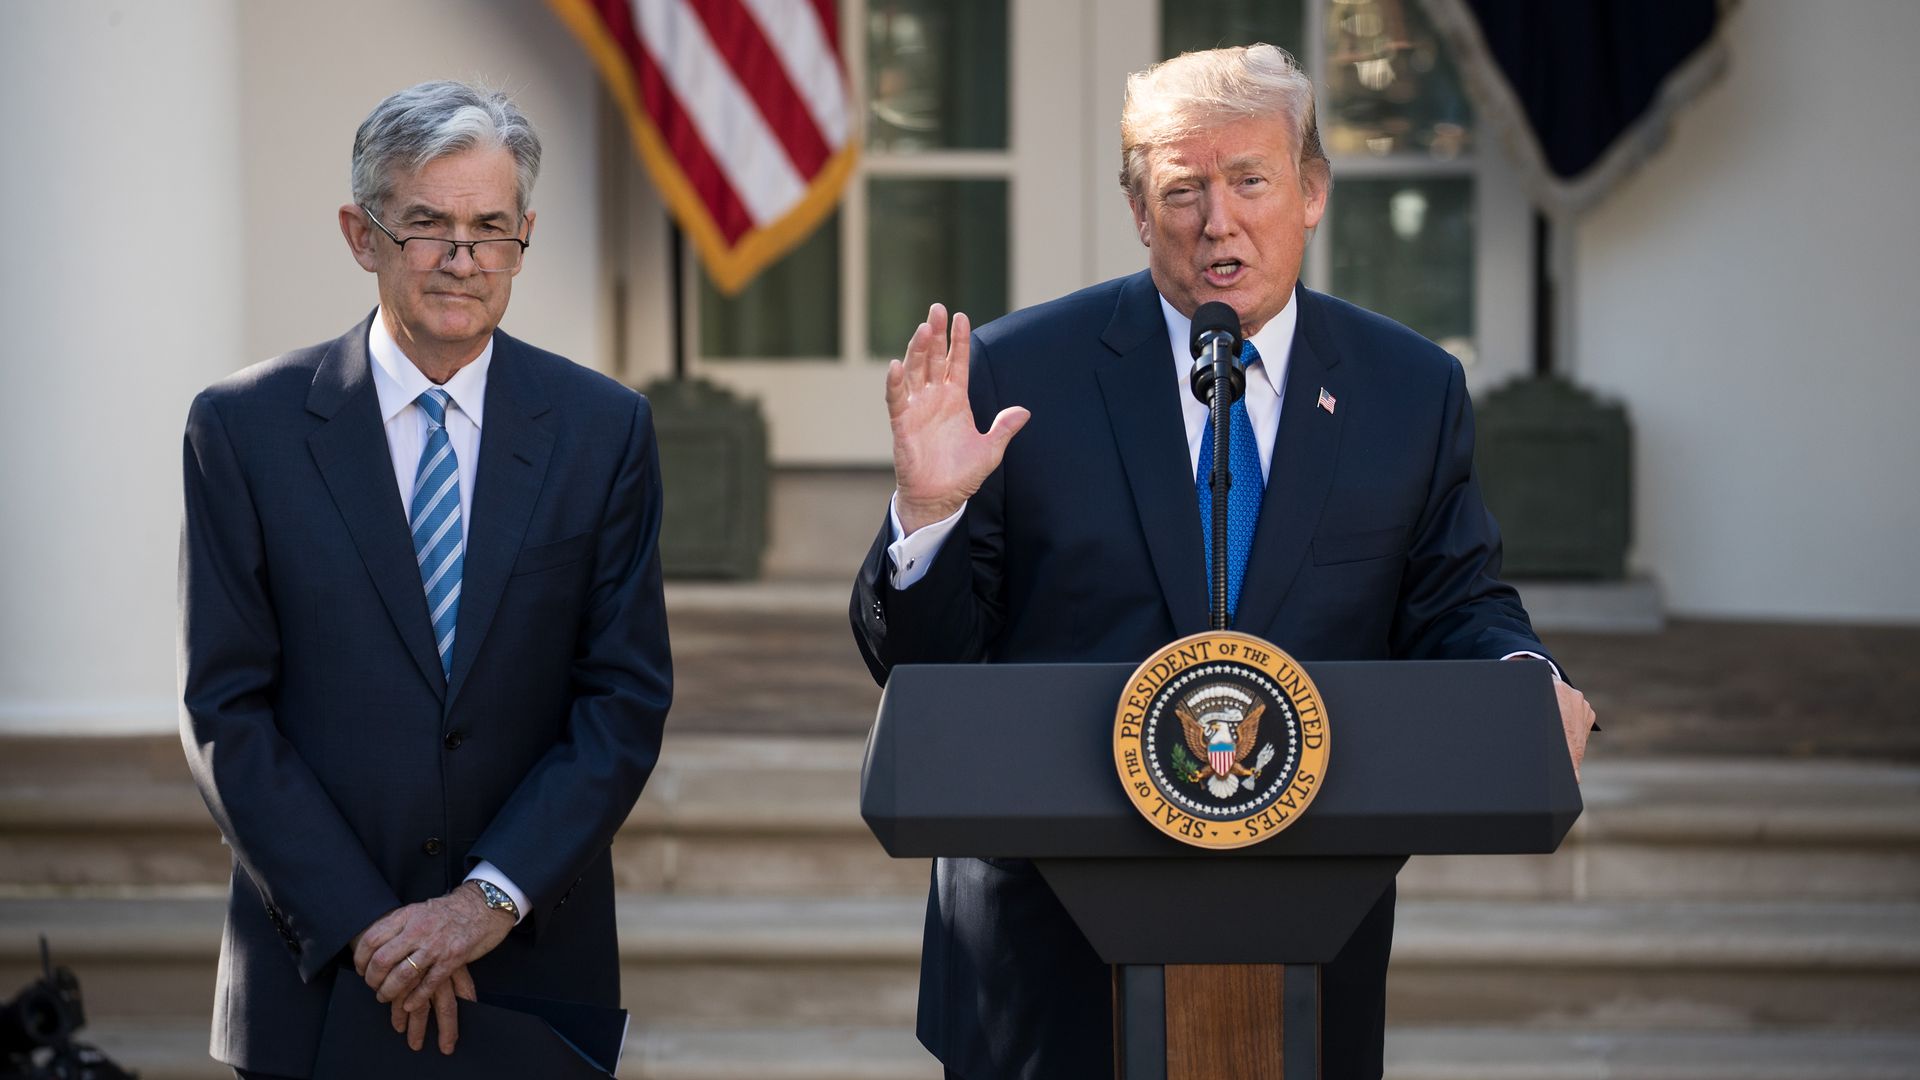 President Trump stands with Federal Reserve chairman Jerome Powell in front of the White House